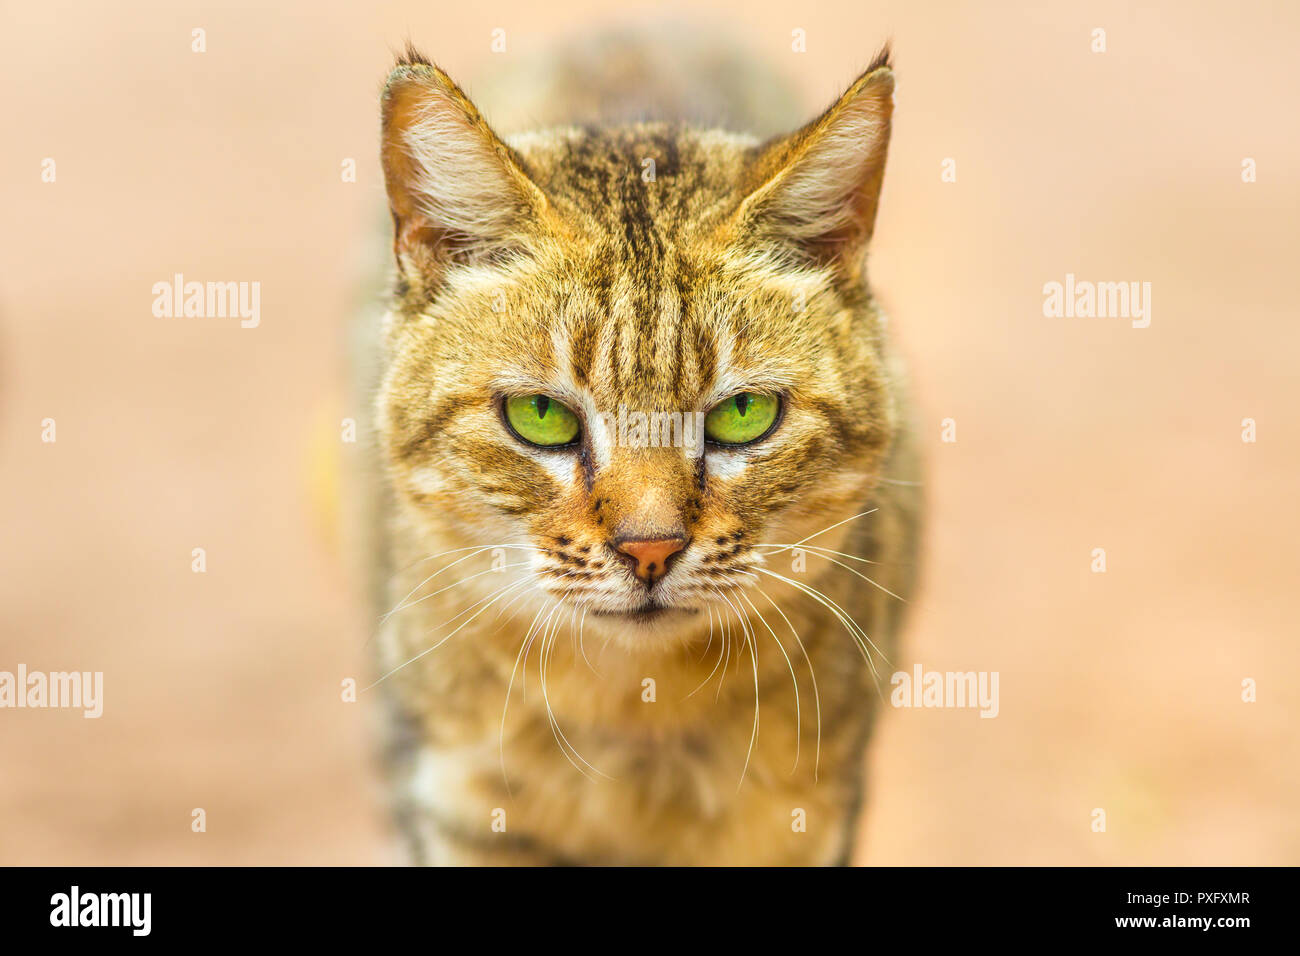 Closeup of African Wild Cat, Felis libyca. Front view of face on blurred background. Wild feline in nature habitat, South Africa. Stock Photo